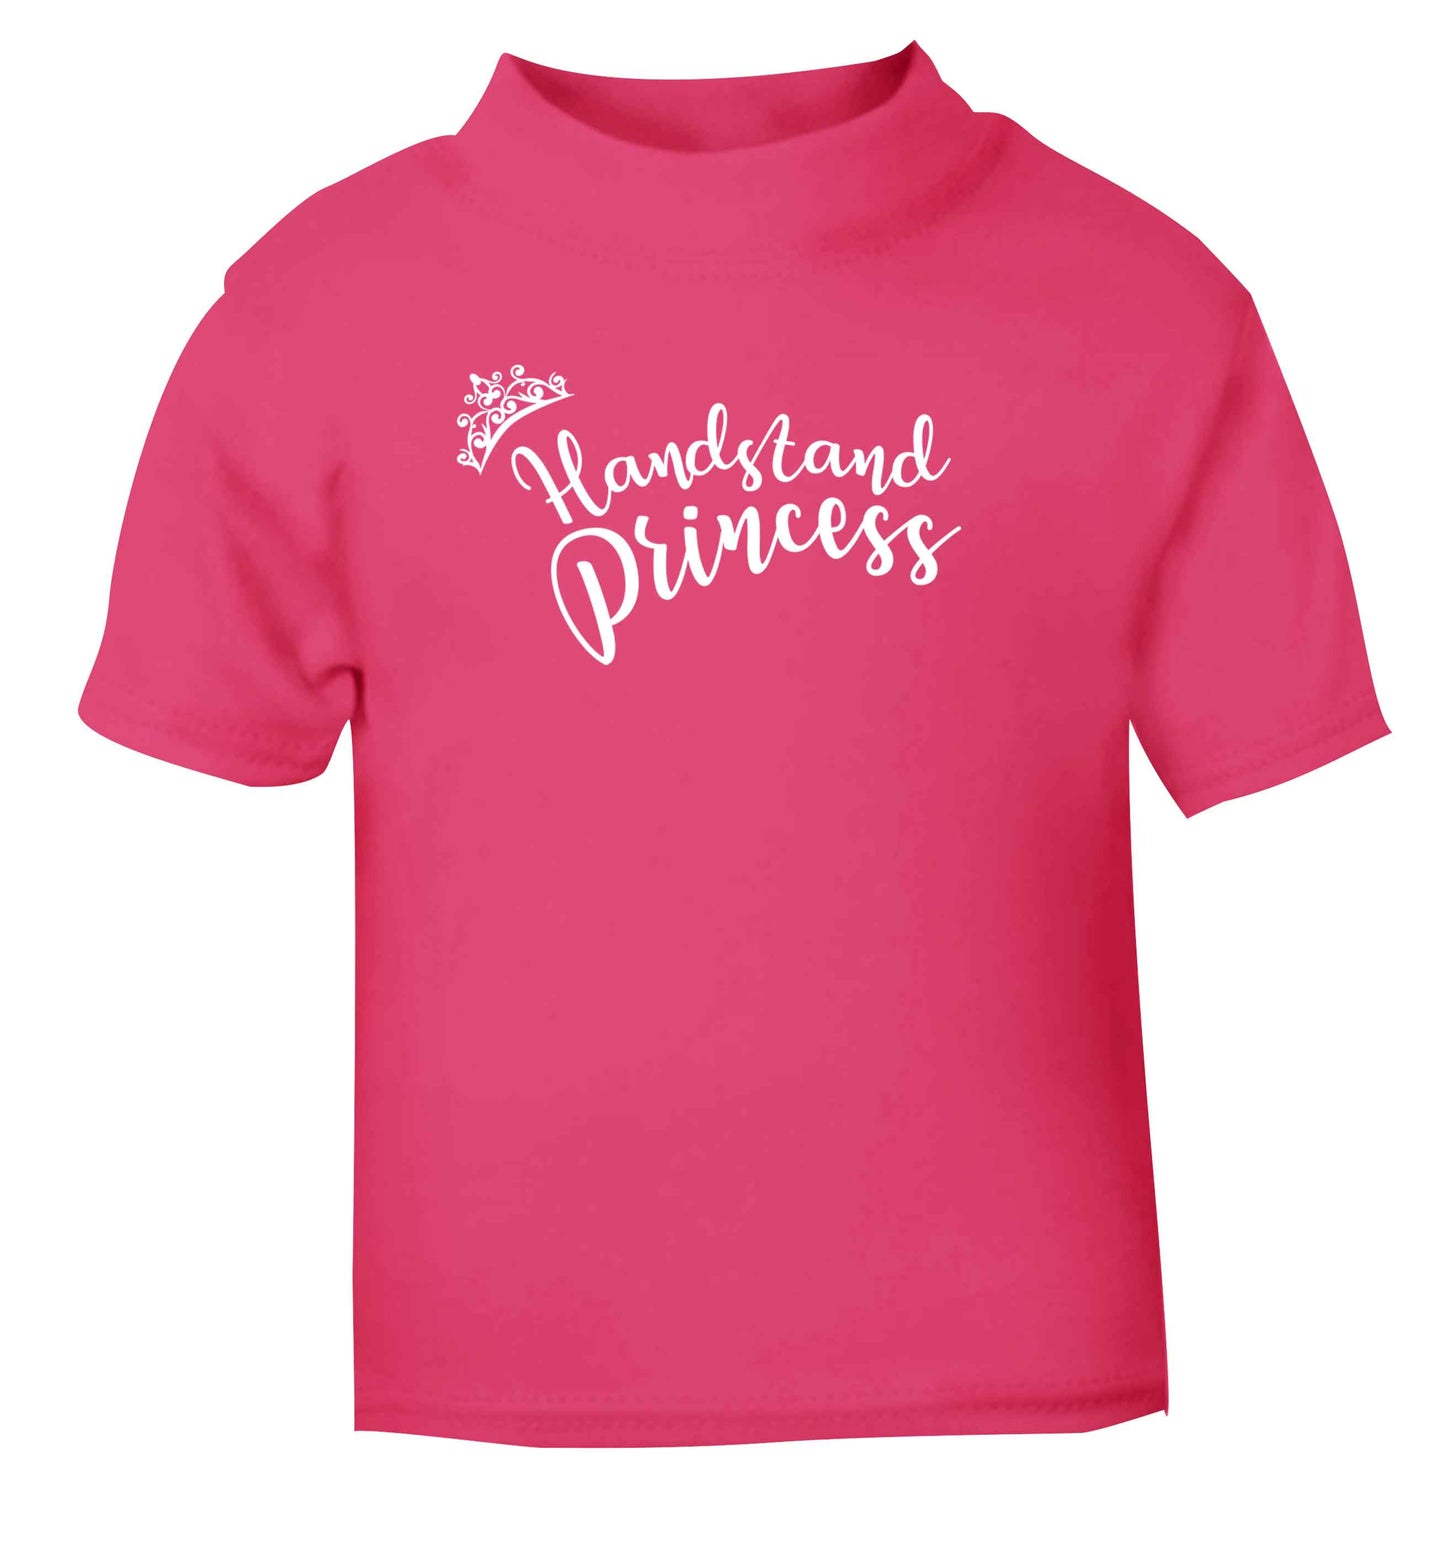 Handstand princess pink Baby Toddler Tshirt 2 Years